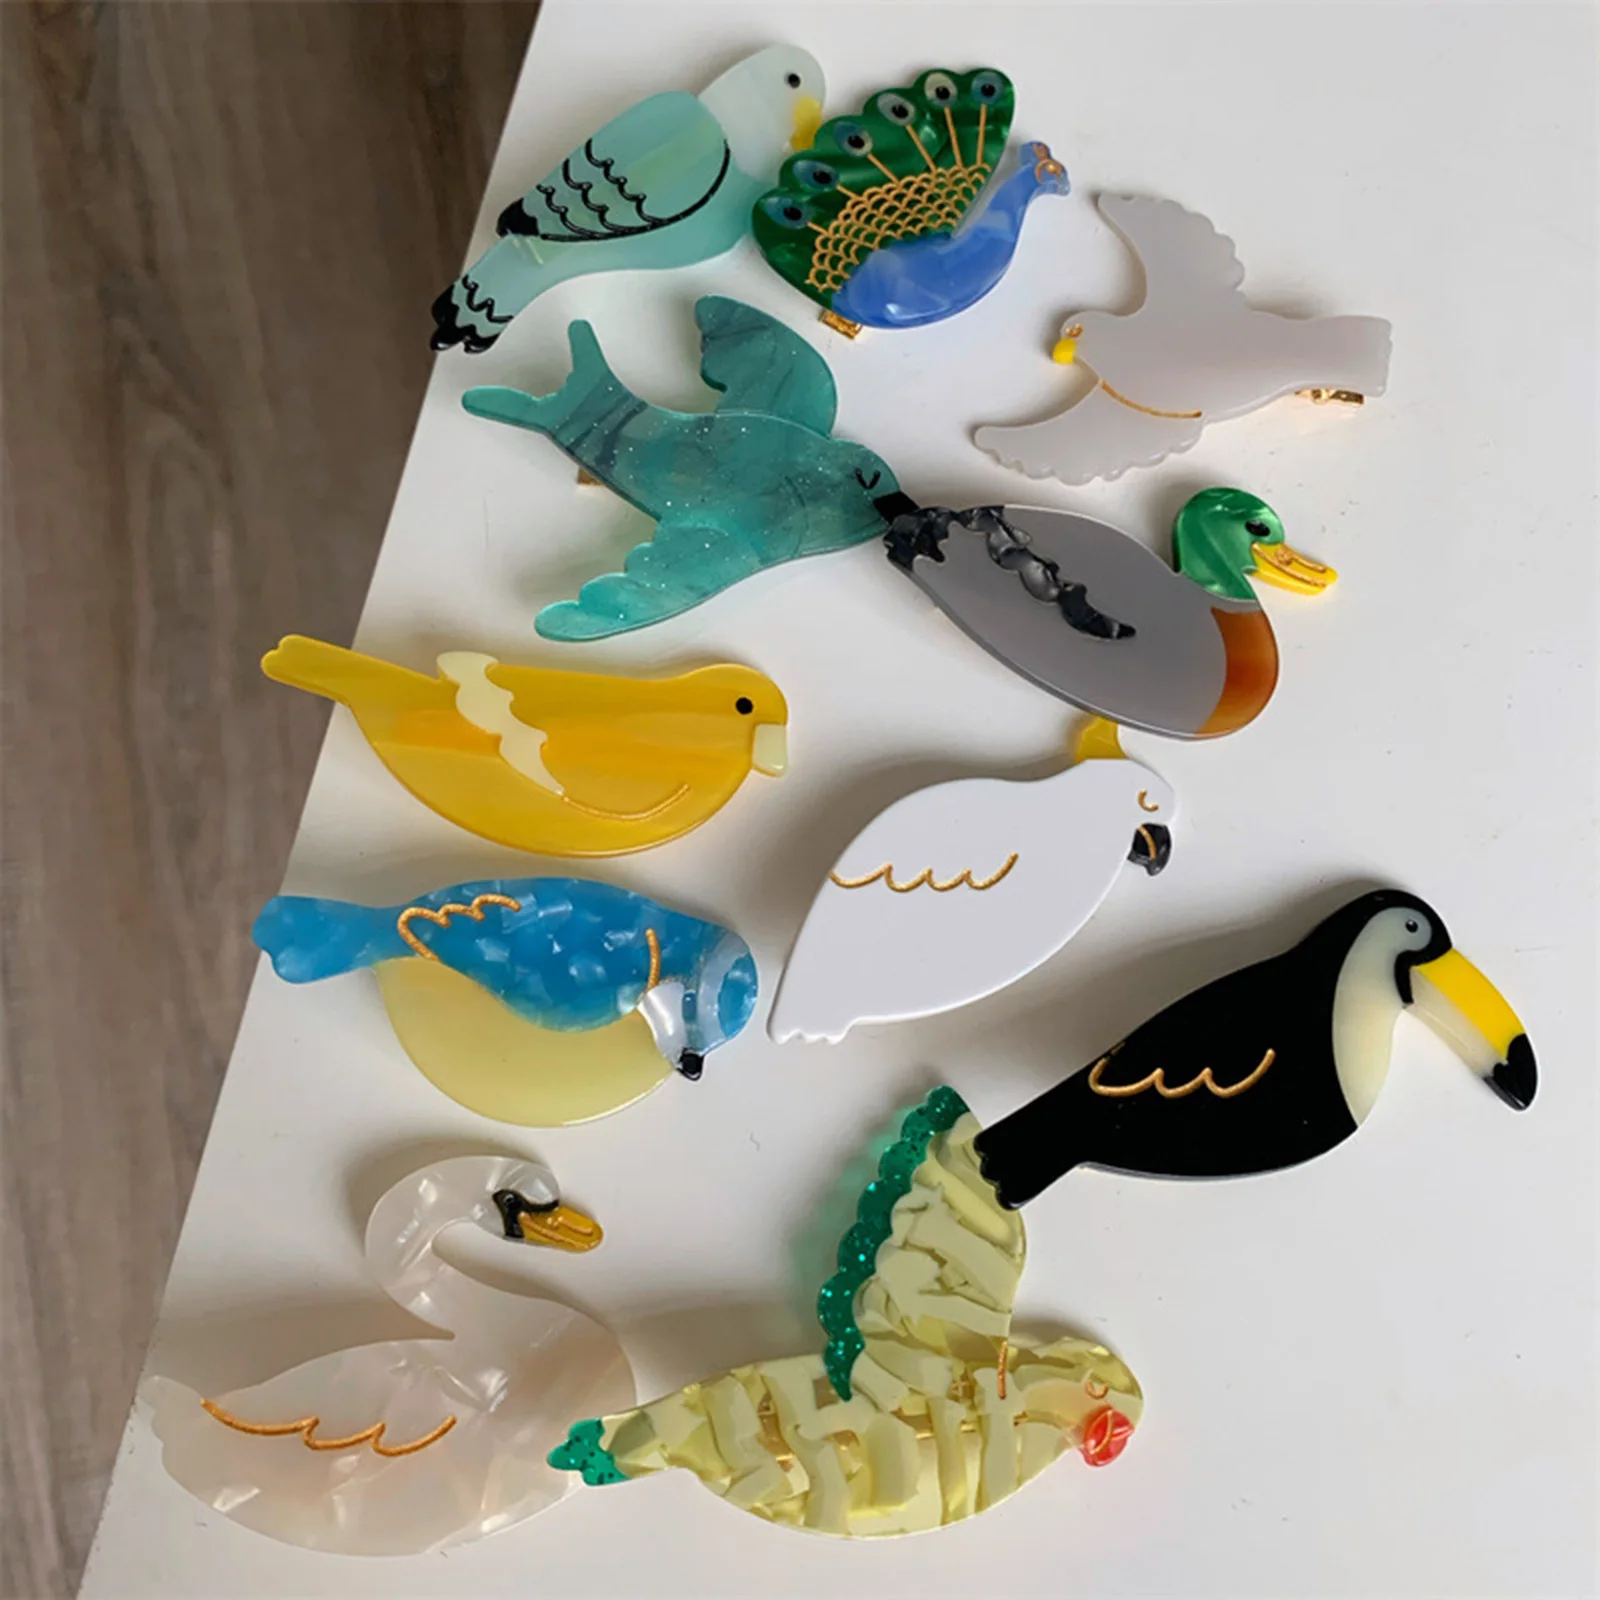 1pc Cute Cartoon Swan Green Duck Parrot Peacock Acrylic Hair Claw Clips for Women Girls Hairclip Barrettes Hairpins Accessories soap box yellow duck shape cartoon soap dish drainable soap holder soap container soap dish for tray bathroom f2l7